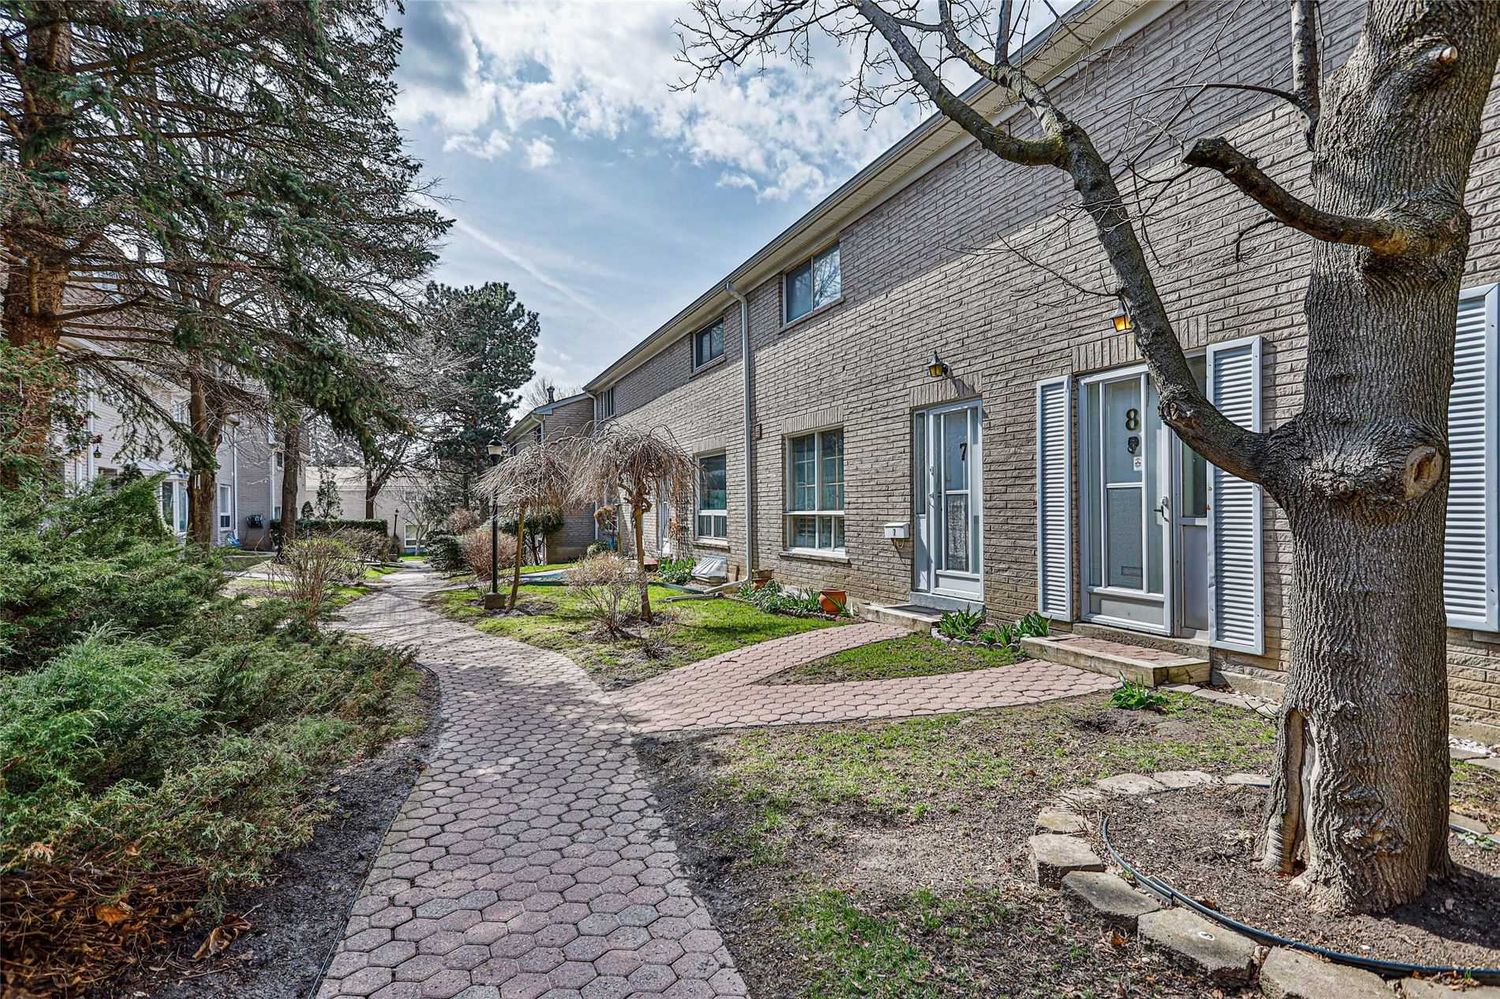 75-85 Rameau Drive. Rameau Drive Townhomes is located in  North York, Toronto - image #1 of 2